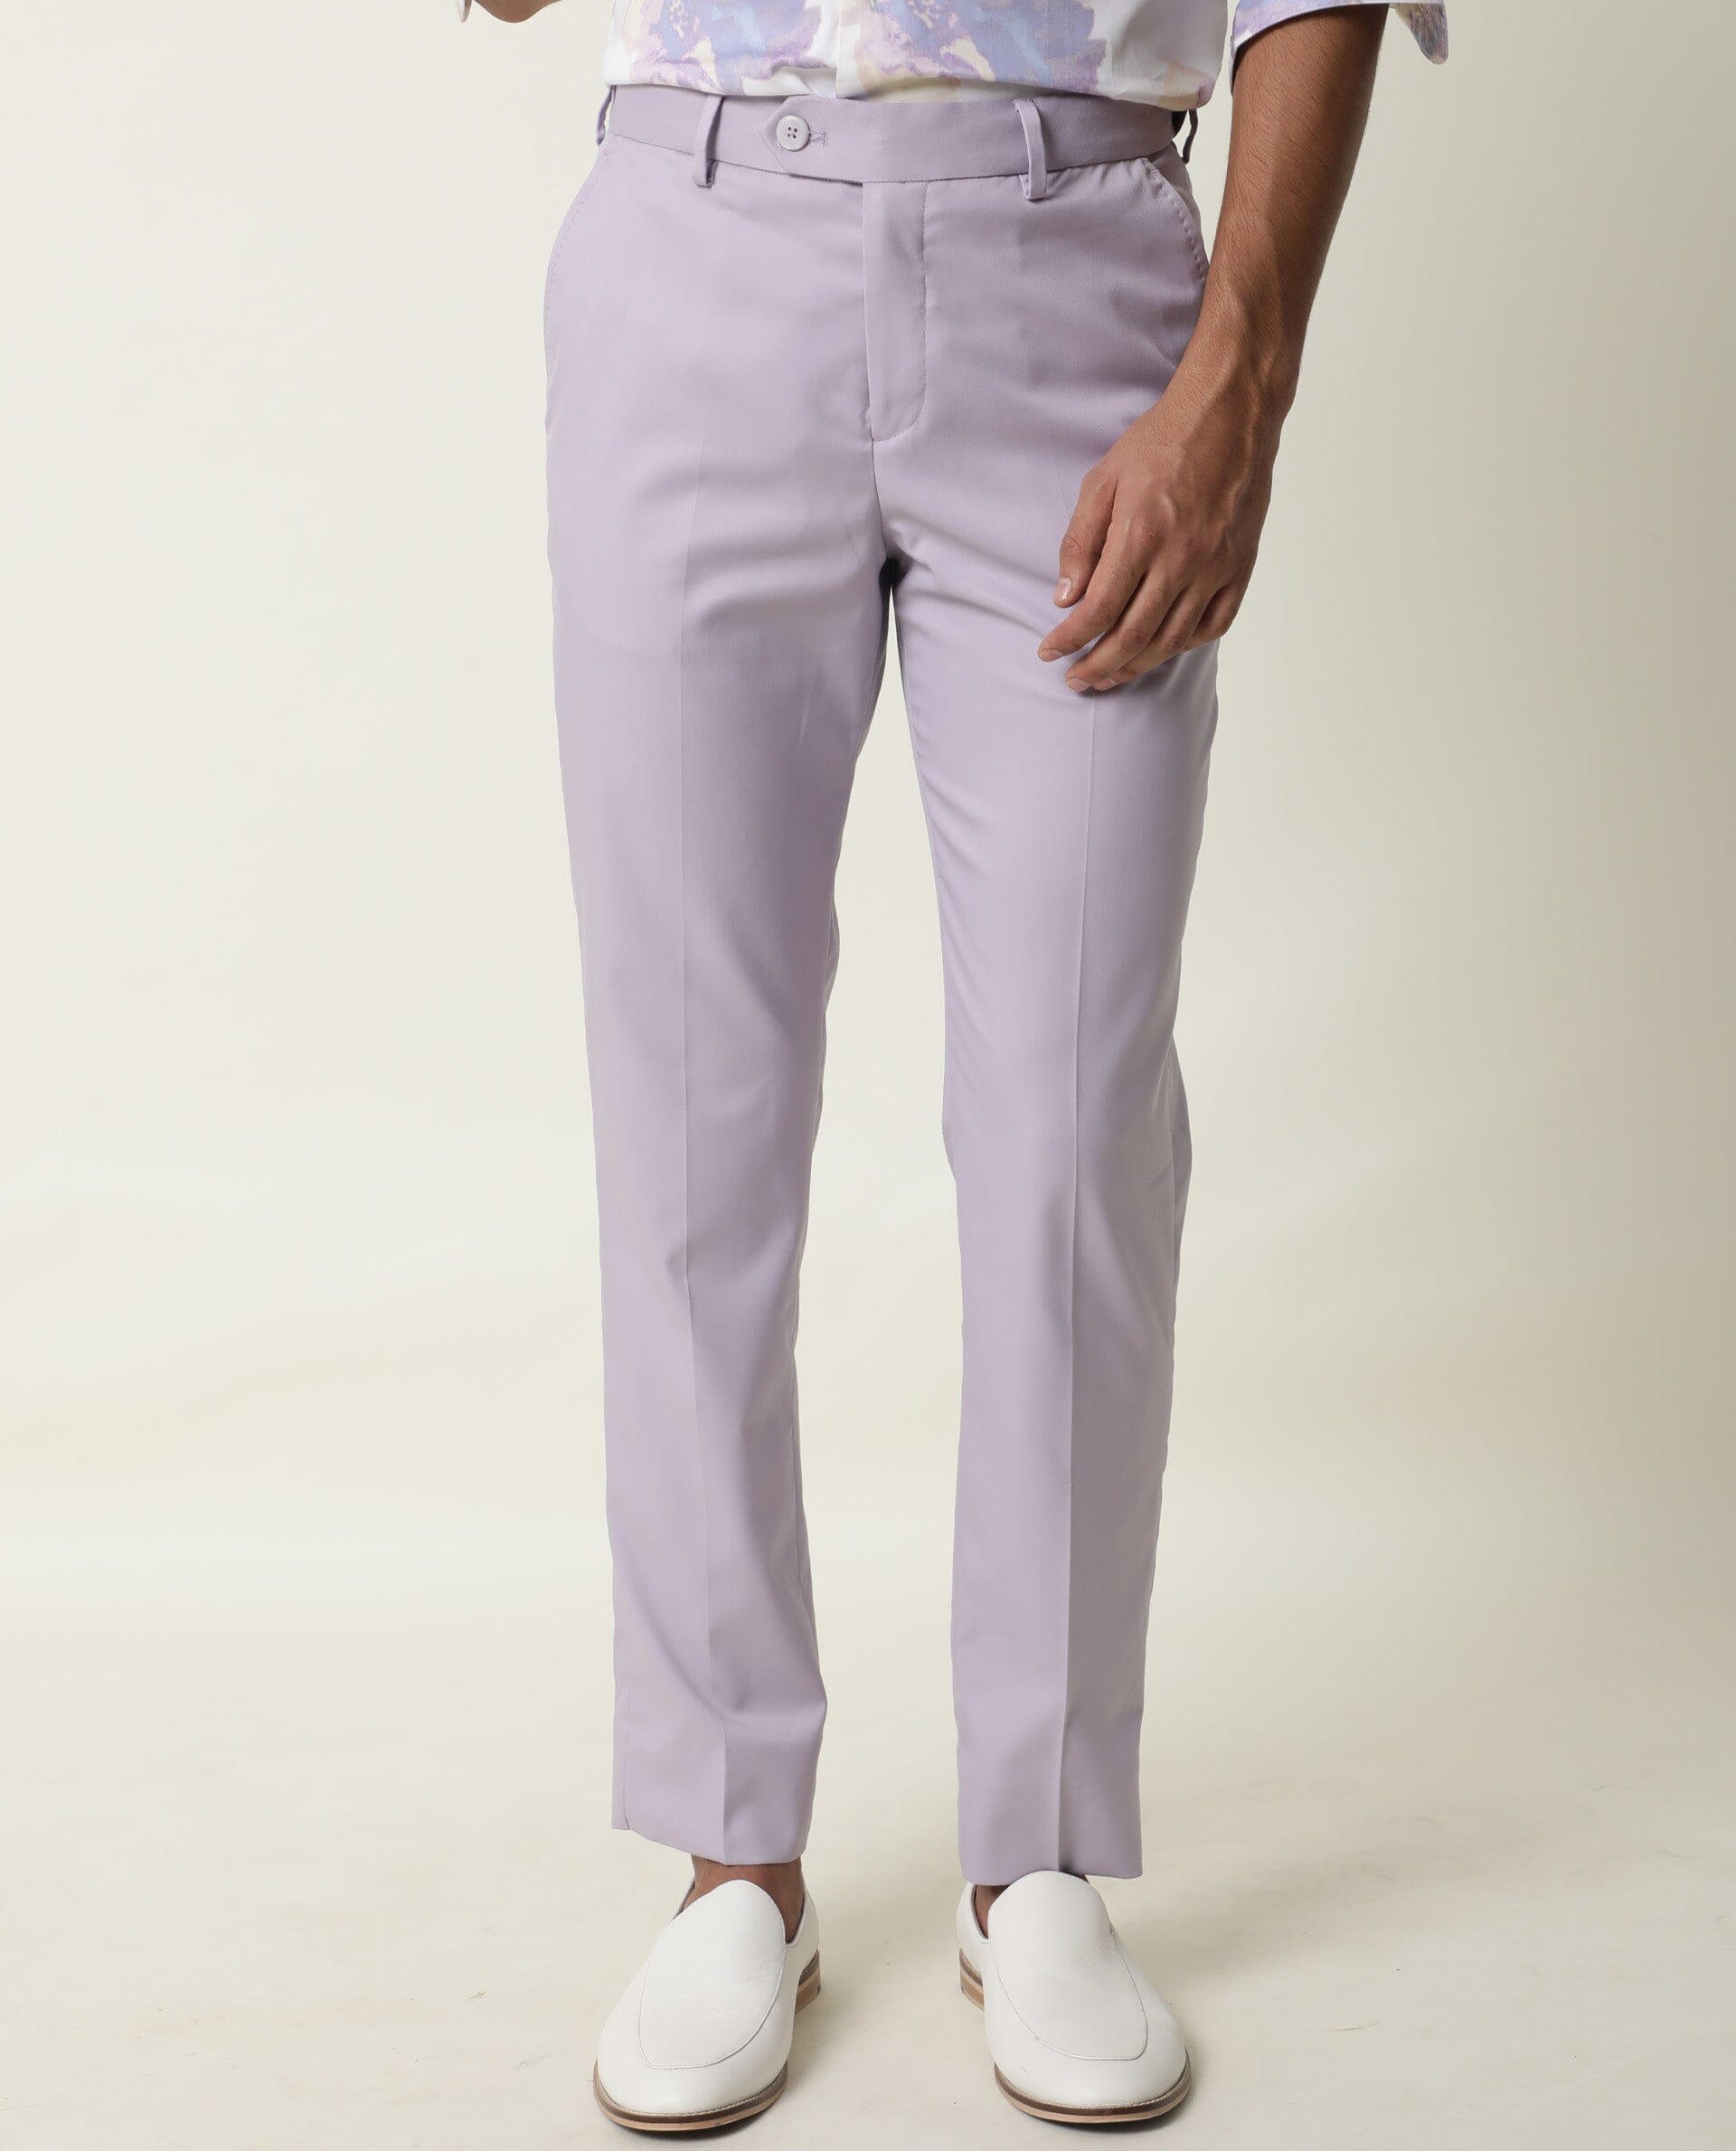 Buy Light Purple Cropped Pant Cotton for Best Price Reviews Free Shipping